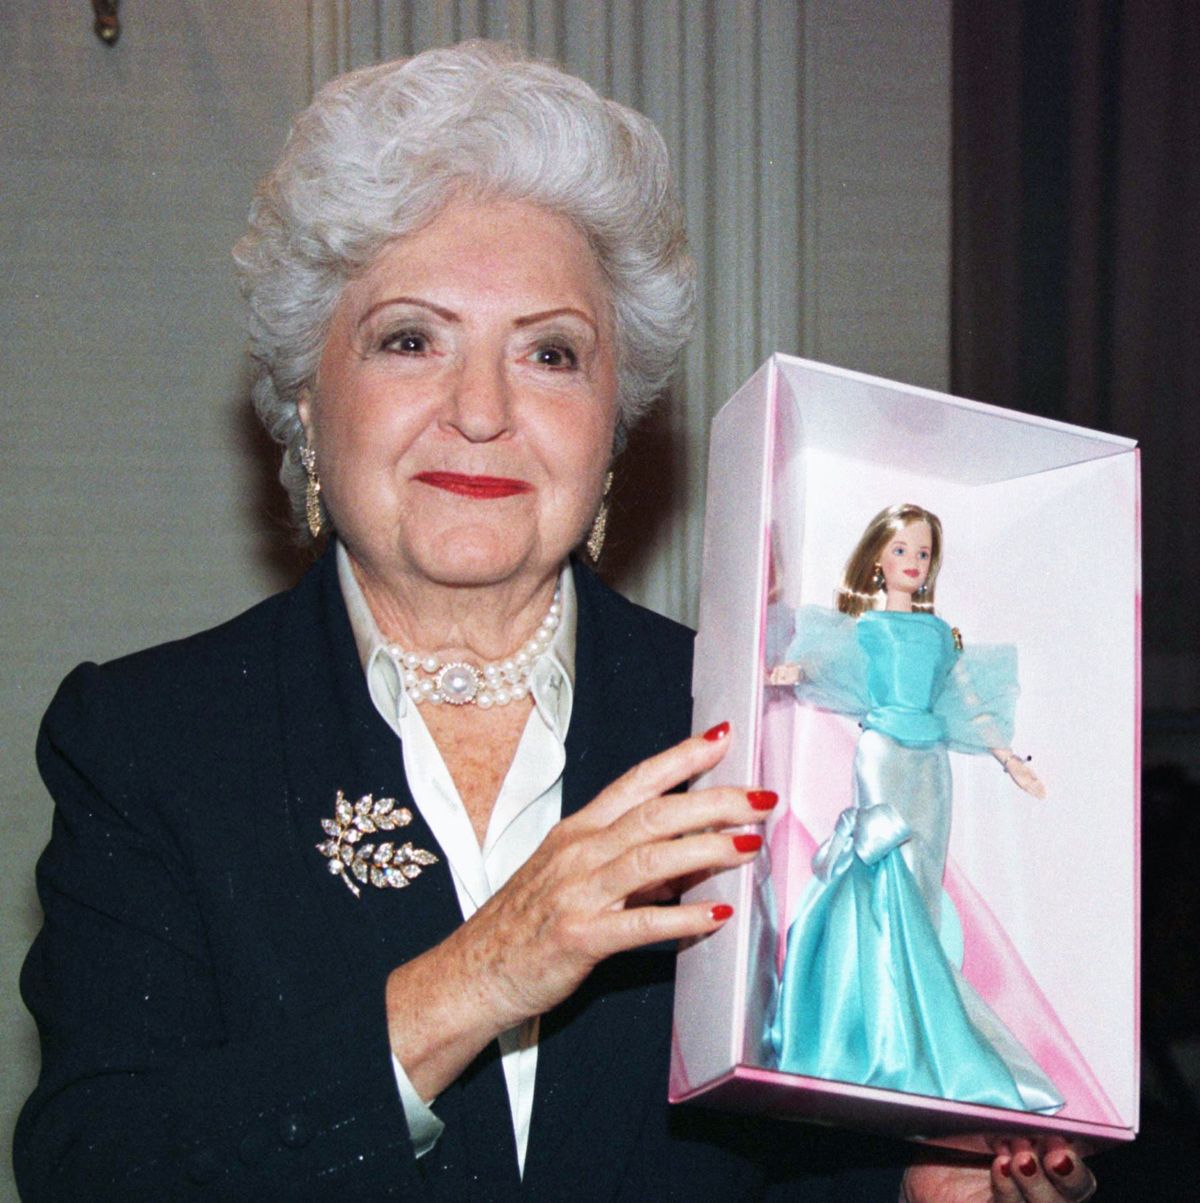 barbie creator ruth handler holding a doll inside a box and smiling for a photo